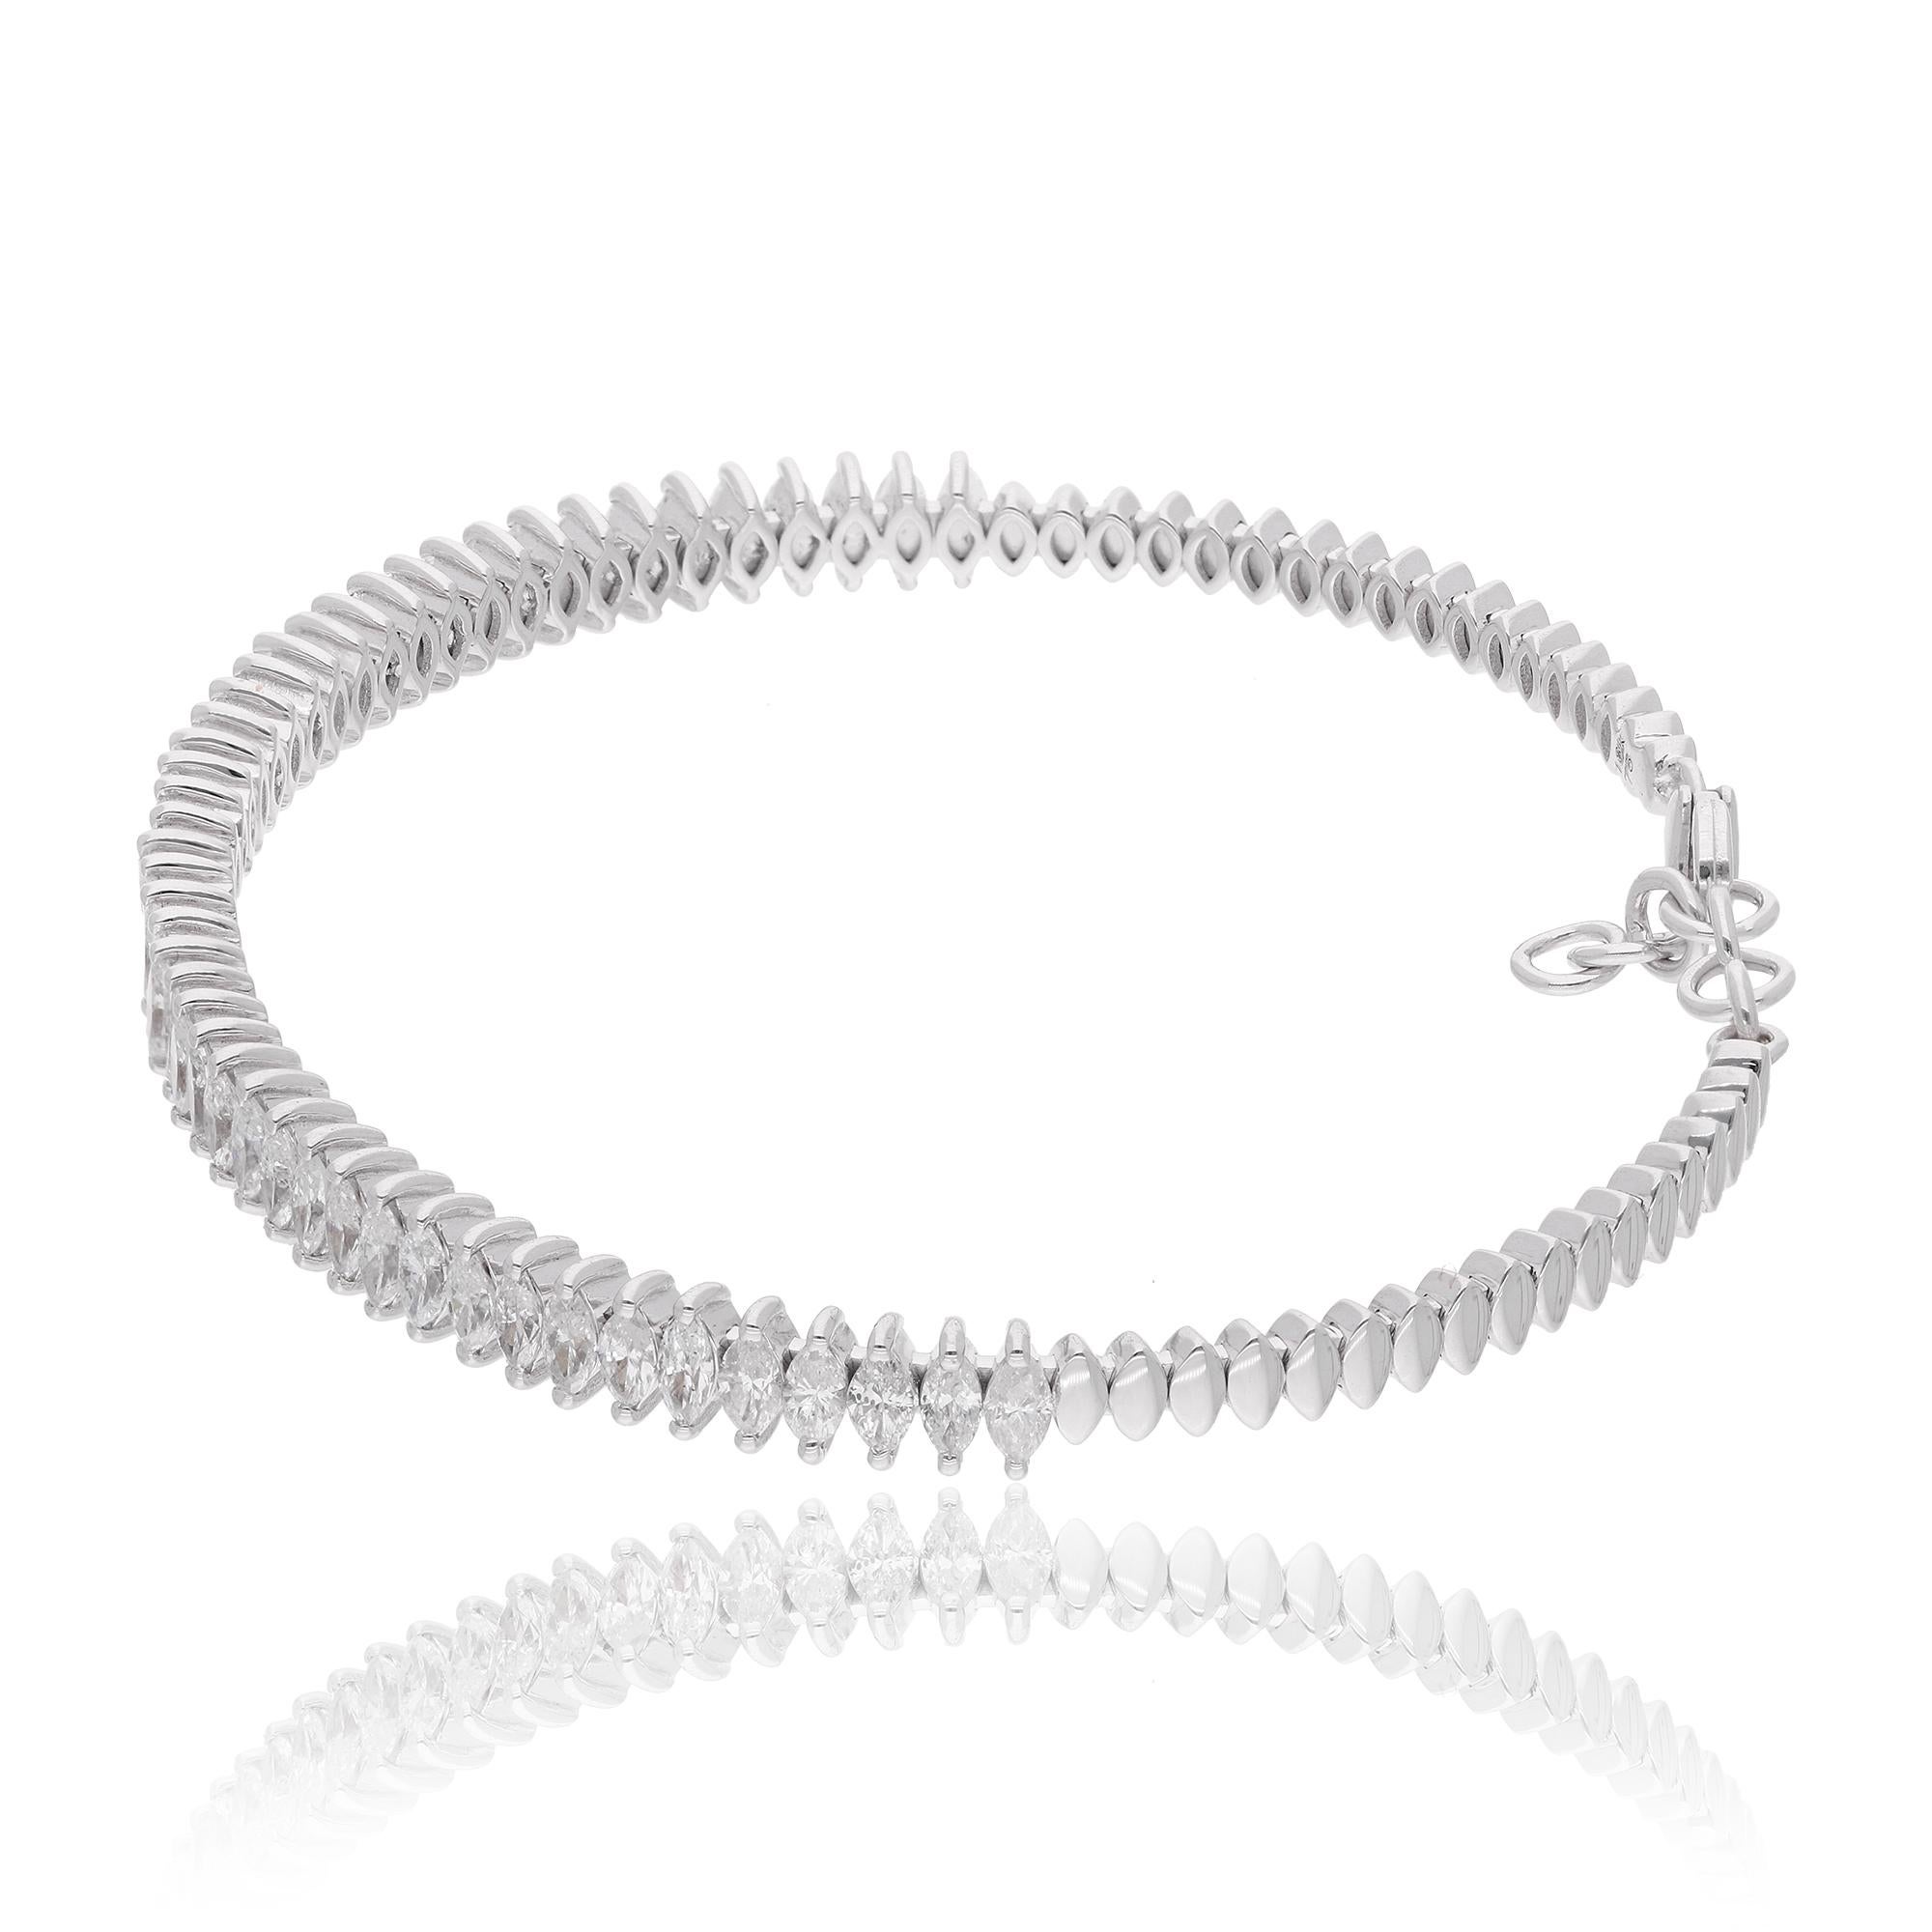 This stunning Diamond Tennis Bracelet is a luxurious and timeless accessory that will add a touch of elegance to any outfit. The bracelet features a continuous row of sparkling marquise diamonds. This bracelet is available in 10k/14k/18k, Rose